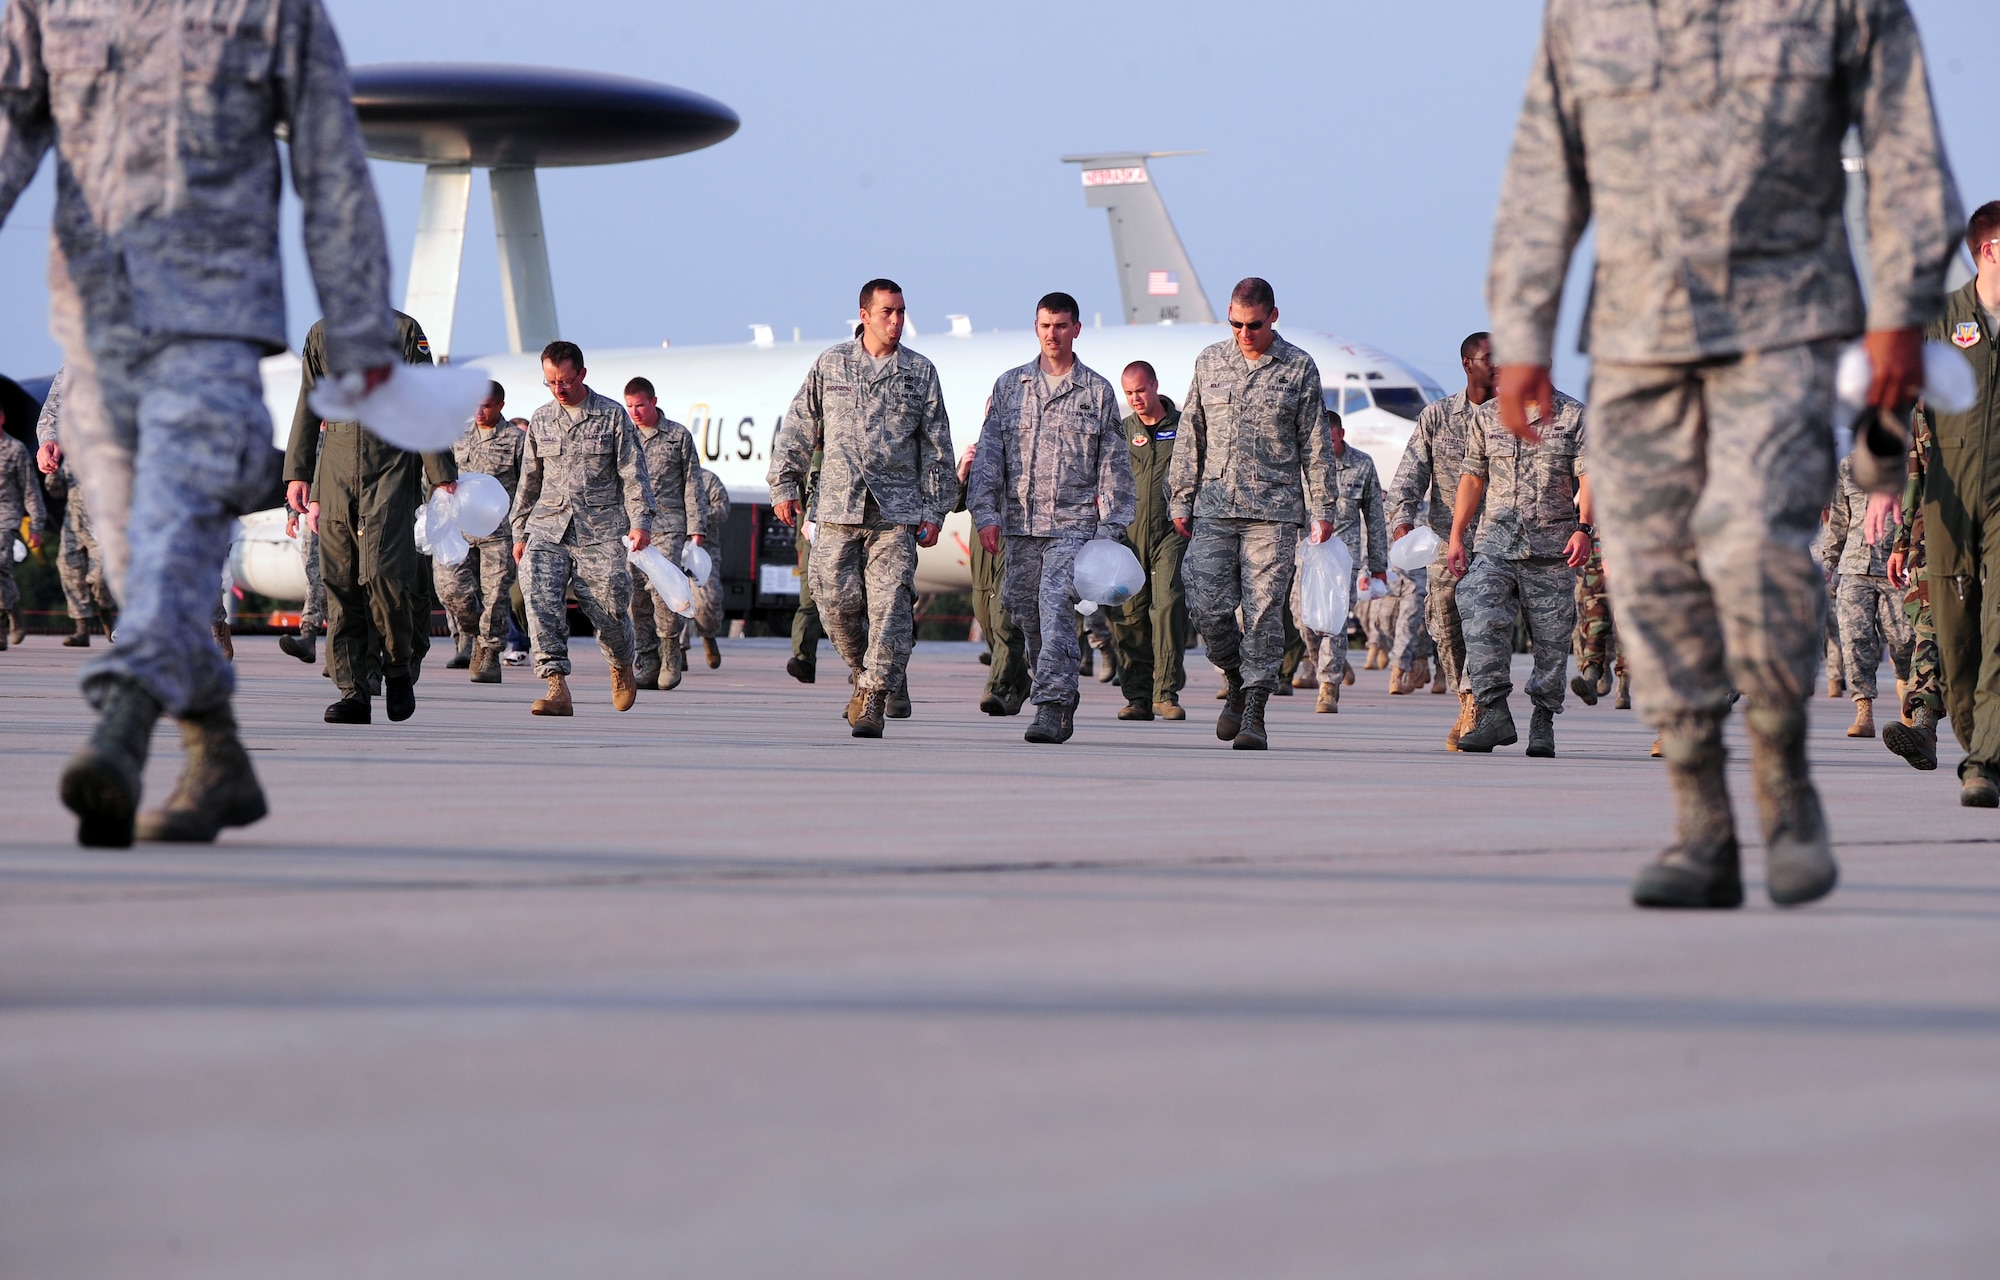 OFFUTT AIR FORCE BASE, Neb. - Hundreds of 55th Wing members walk down the runway here Aug. 30 collecting trash and debris during a foreign object debris walk following the 2010 Defenders of Freedom Air Show and Open House. The early morning FOD walk allowed aircraft operations to begin here safely. U.S. Air Force photo by Josh Plueger